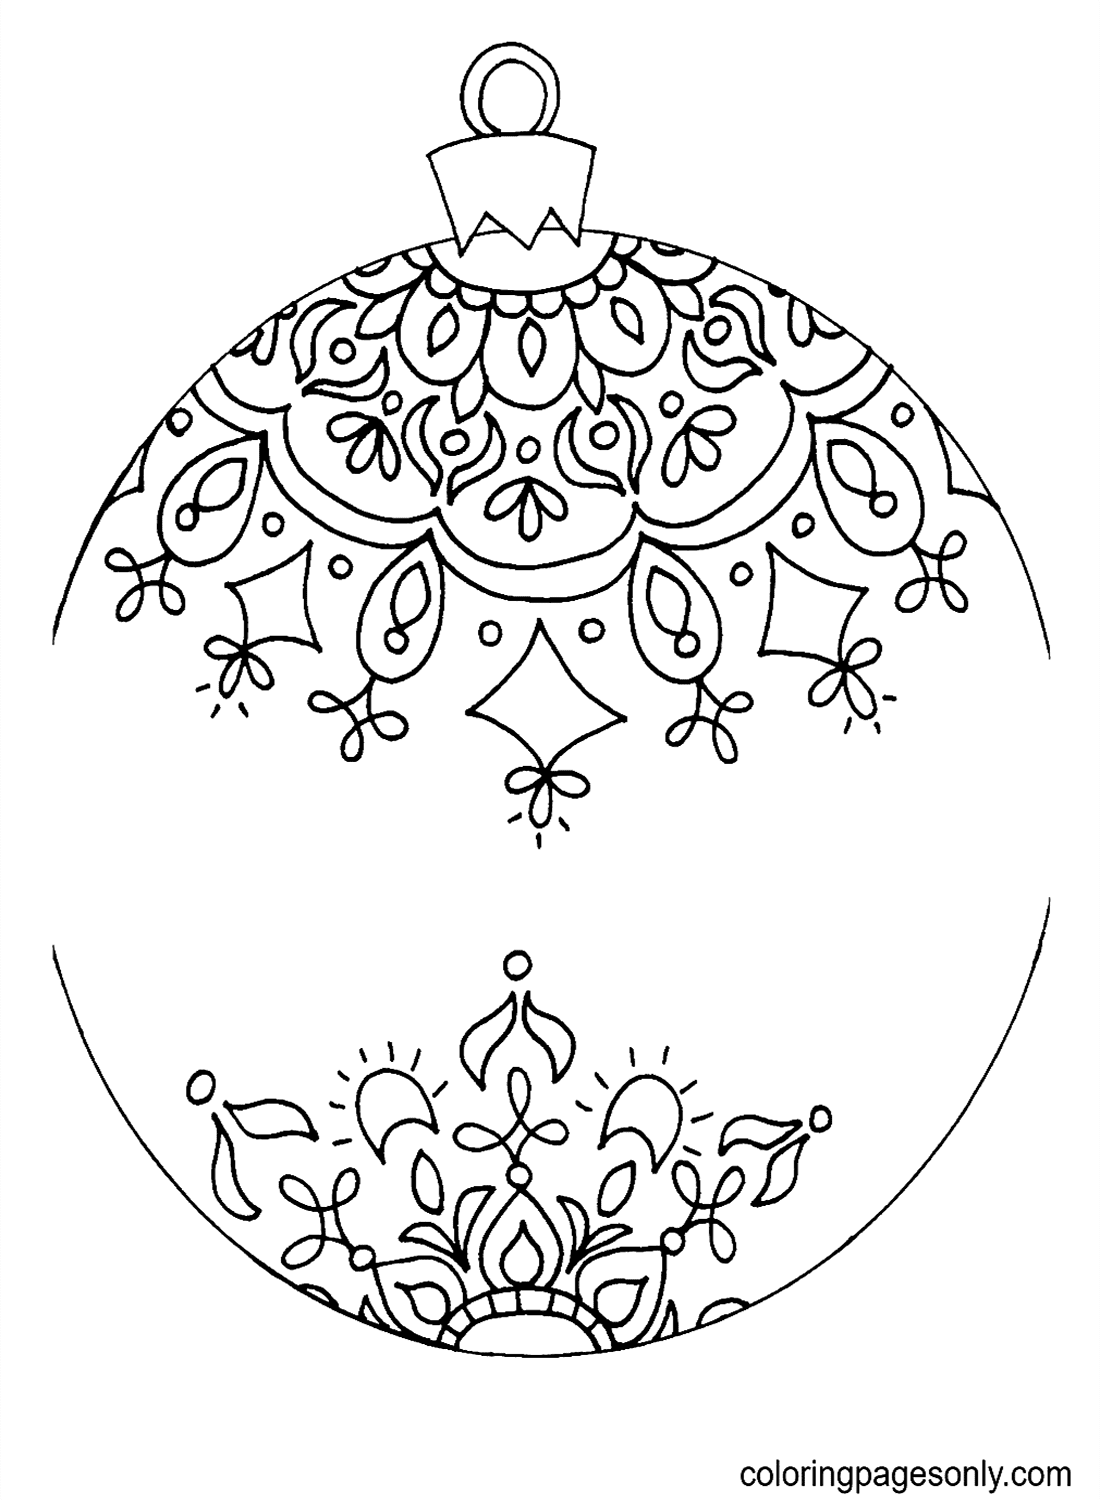 Childrens Christmas Ornaments Coloring Pages